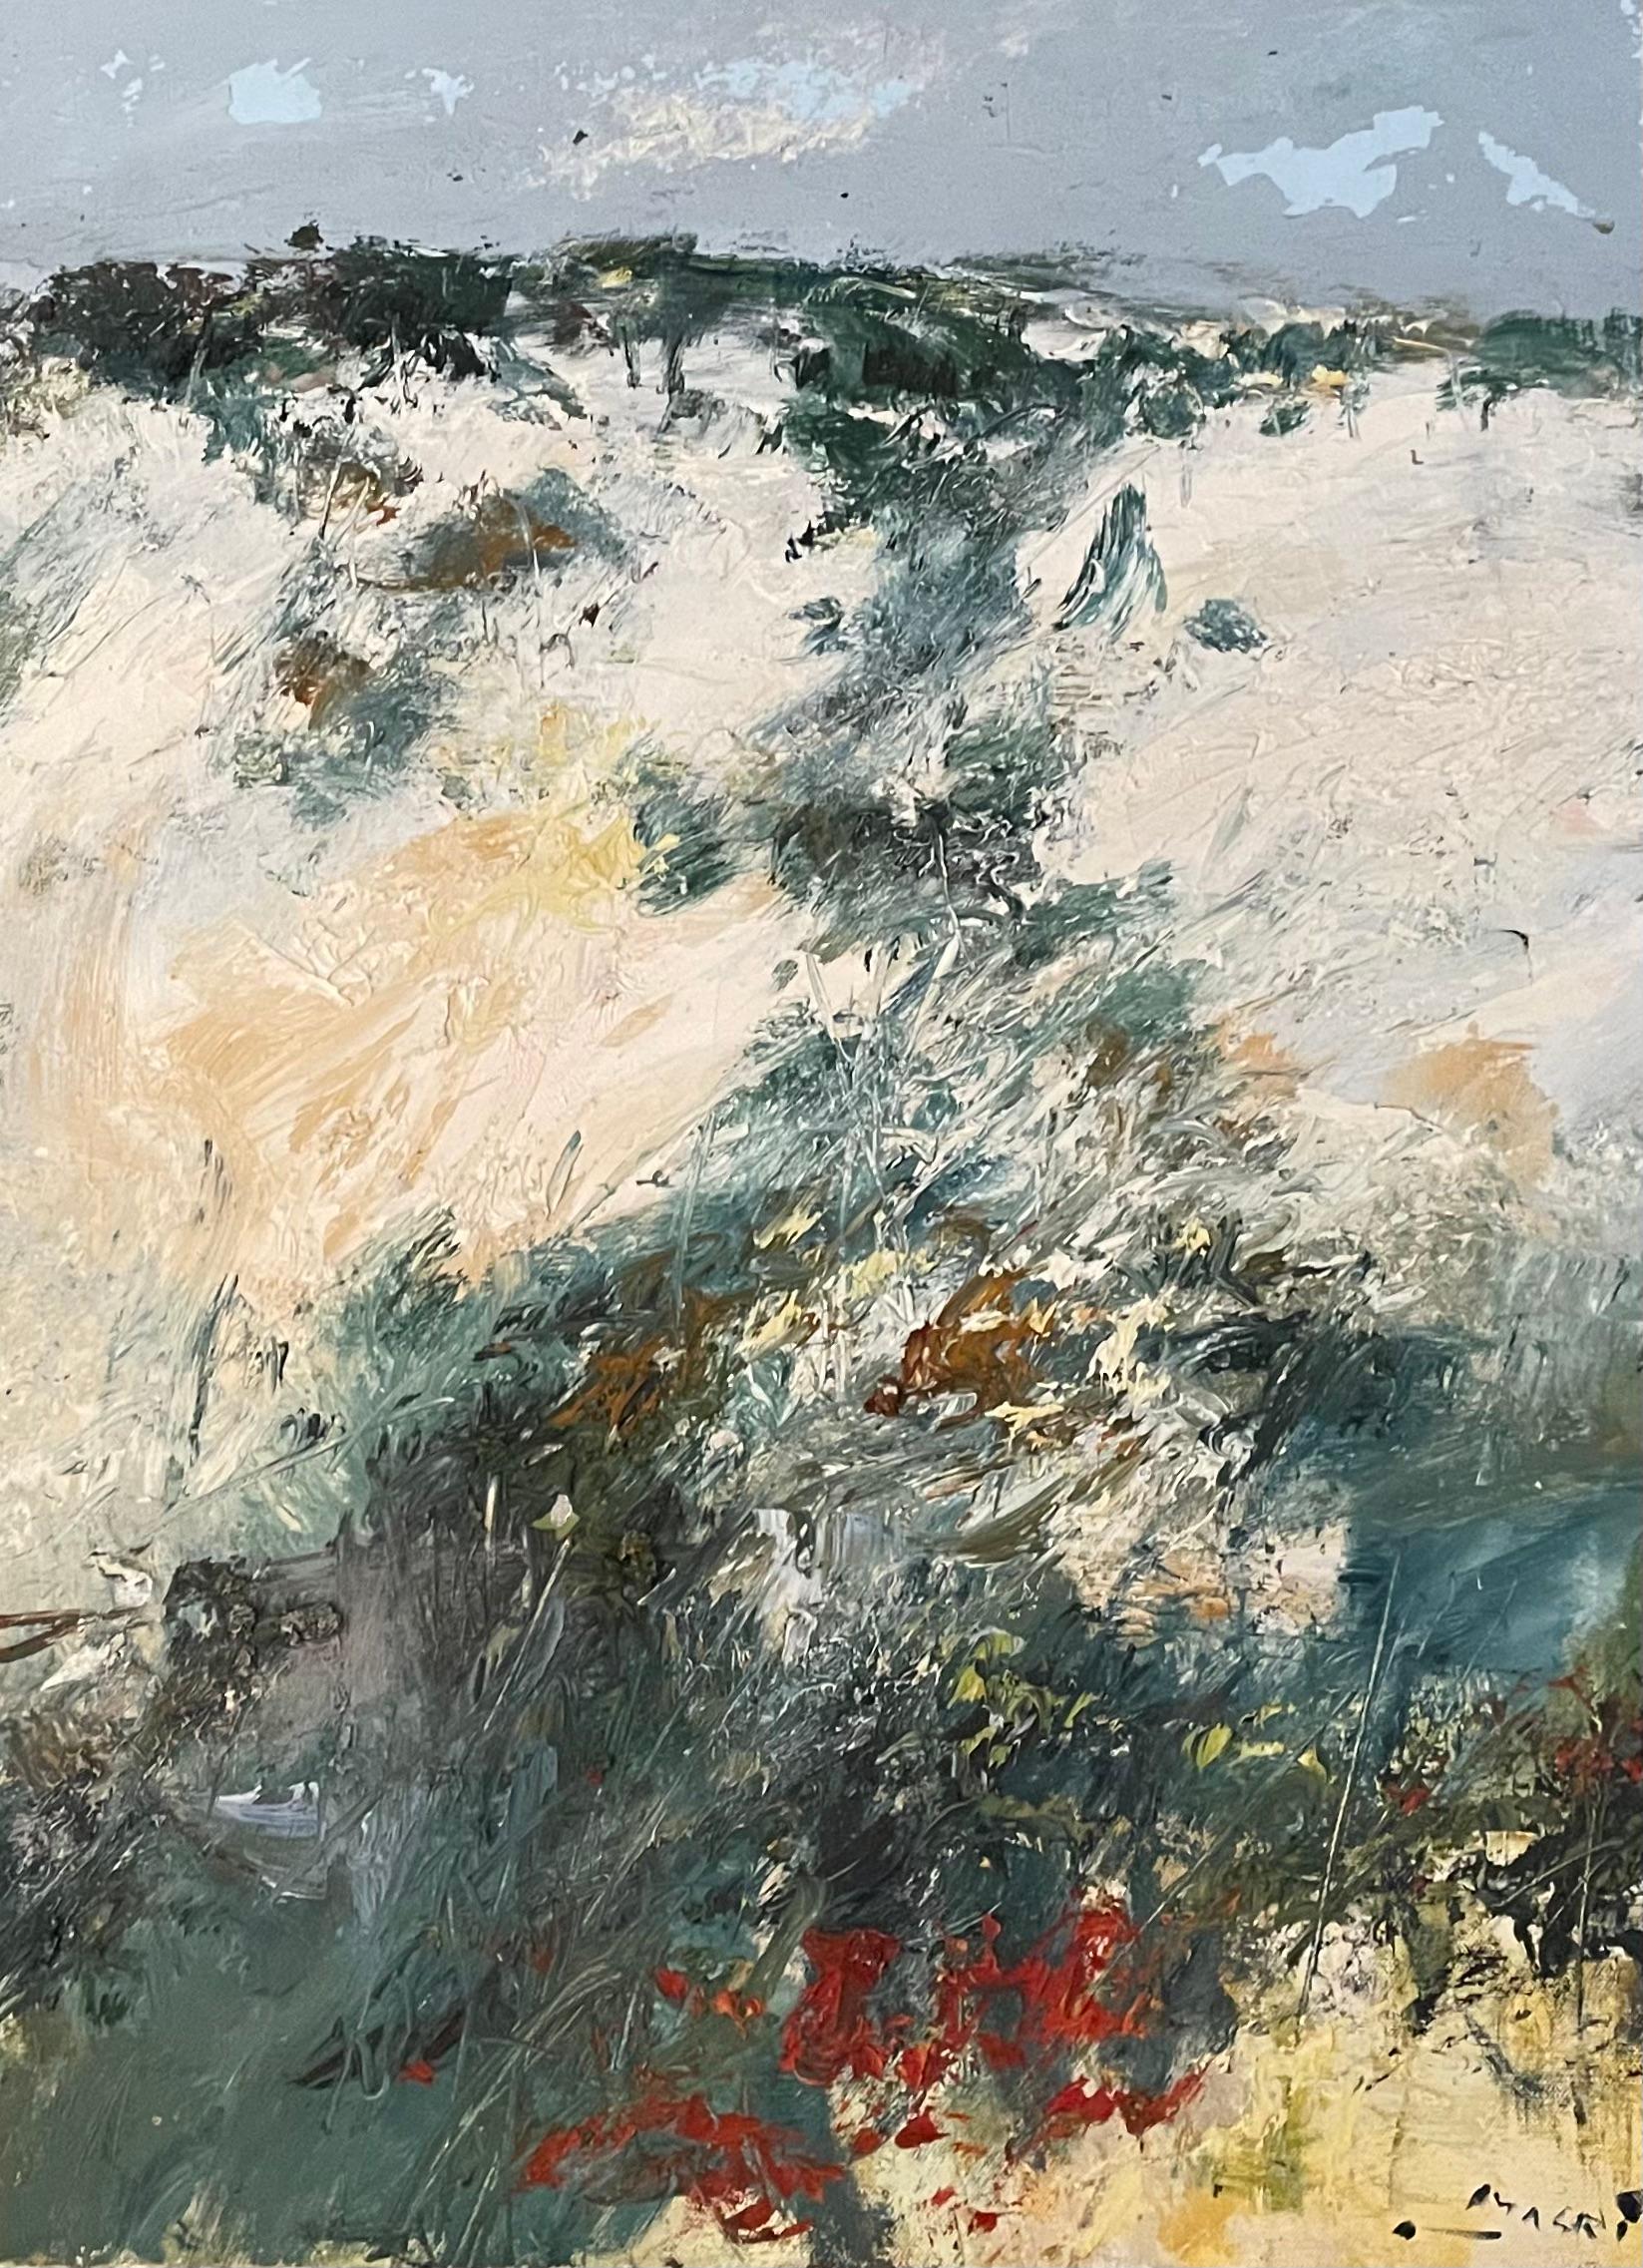 Masri Hayssam Landscape Painting - "Frosty Hillside" Oil on Canvas Contemporary Abstract Expressionist Landscape